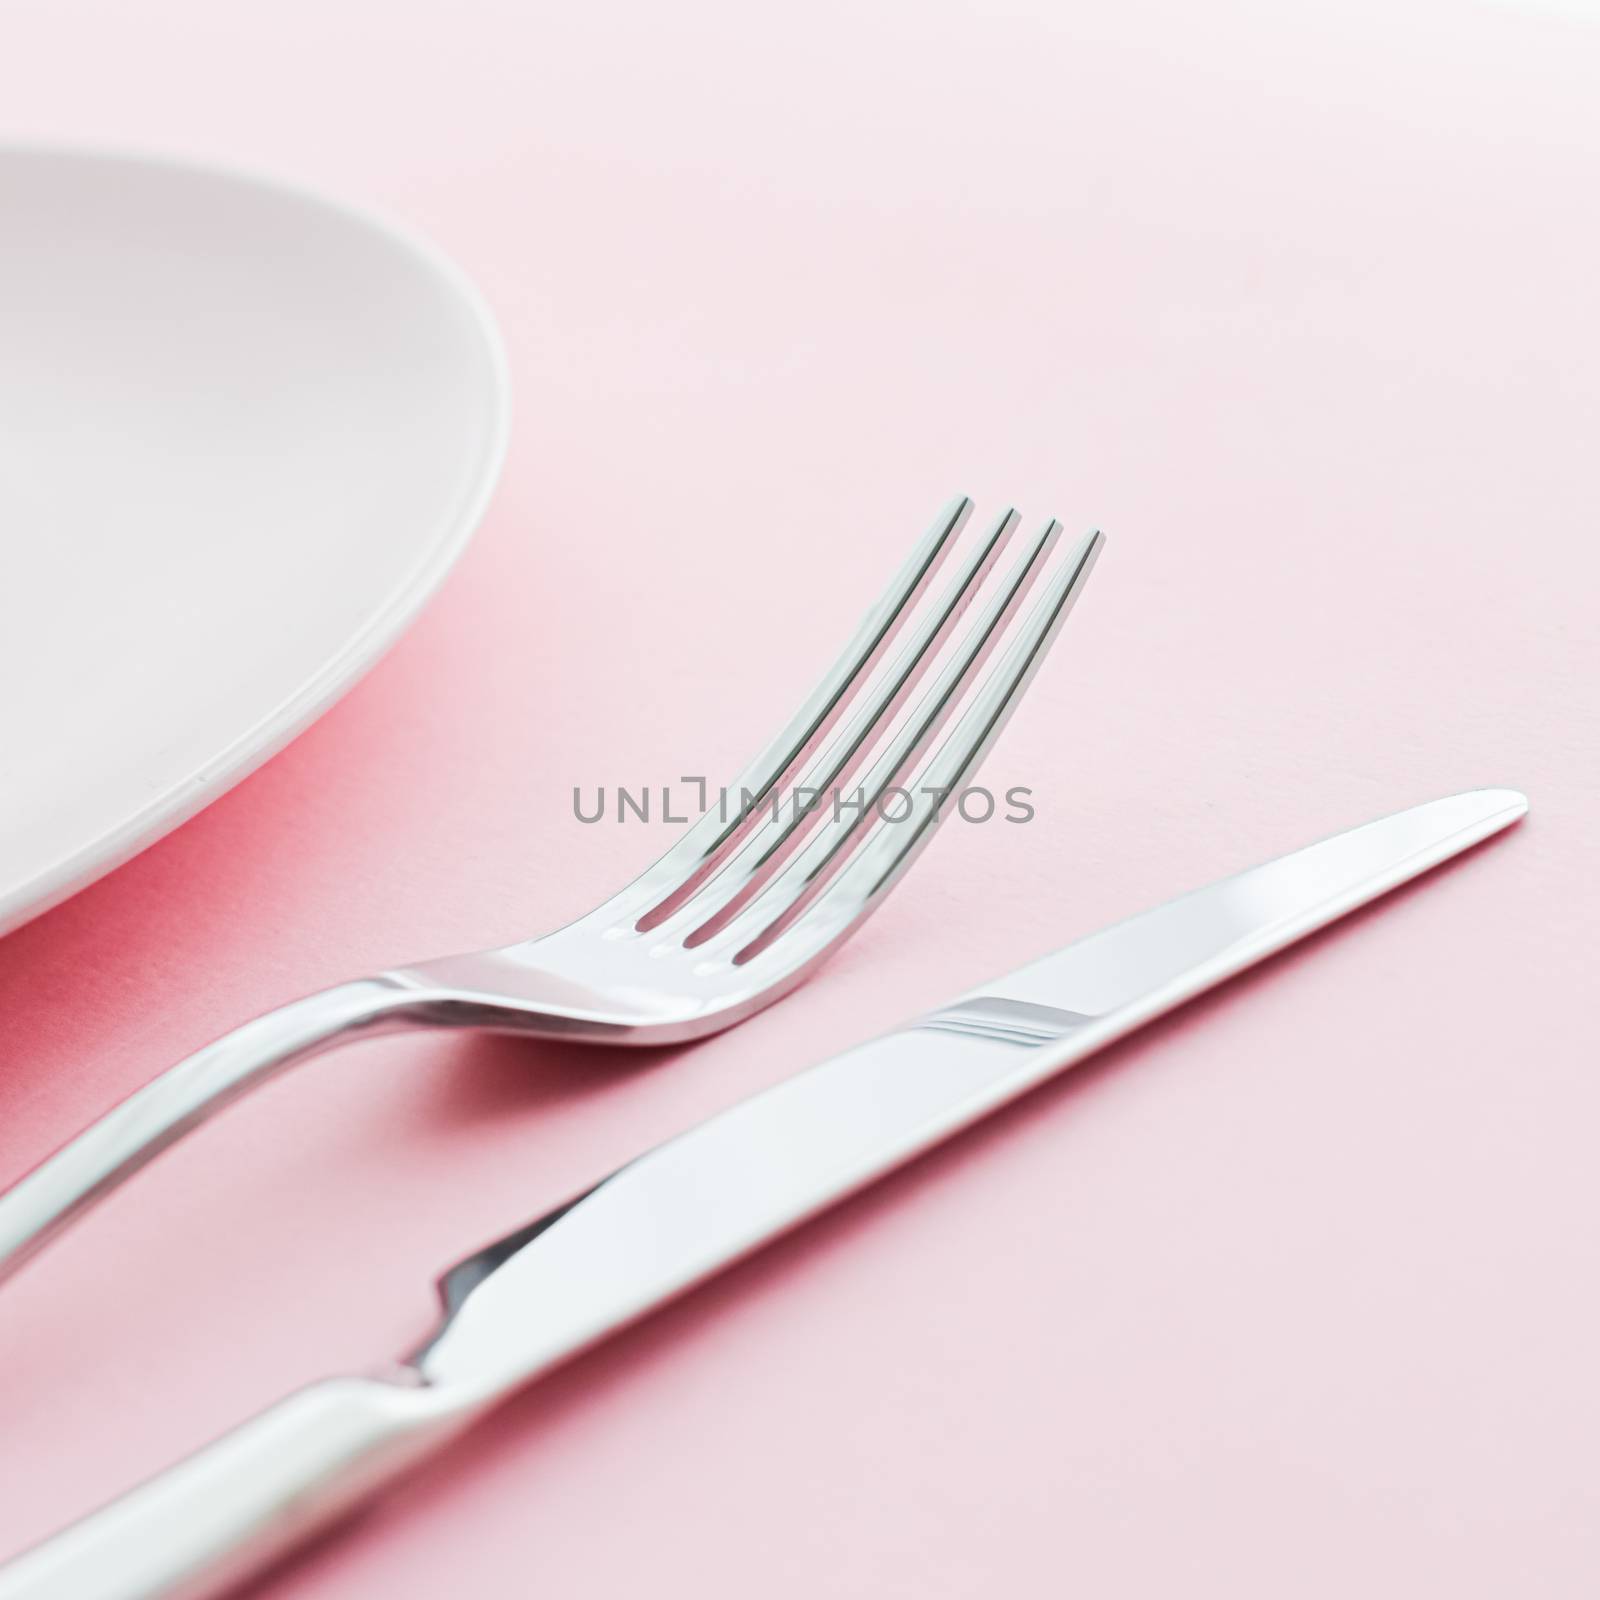 Empty plate and cutlery as mockup set on pink background, top tableware for chef table decor and menu branding design